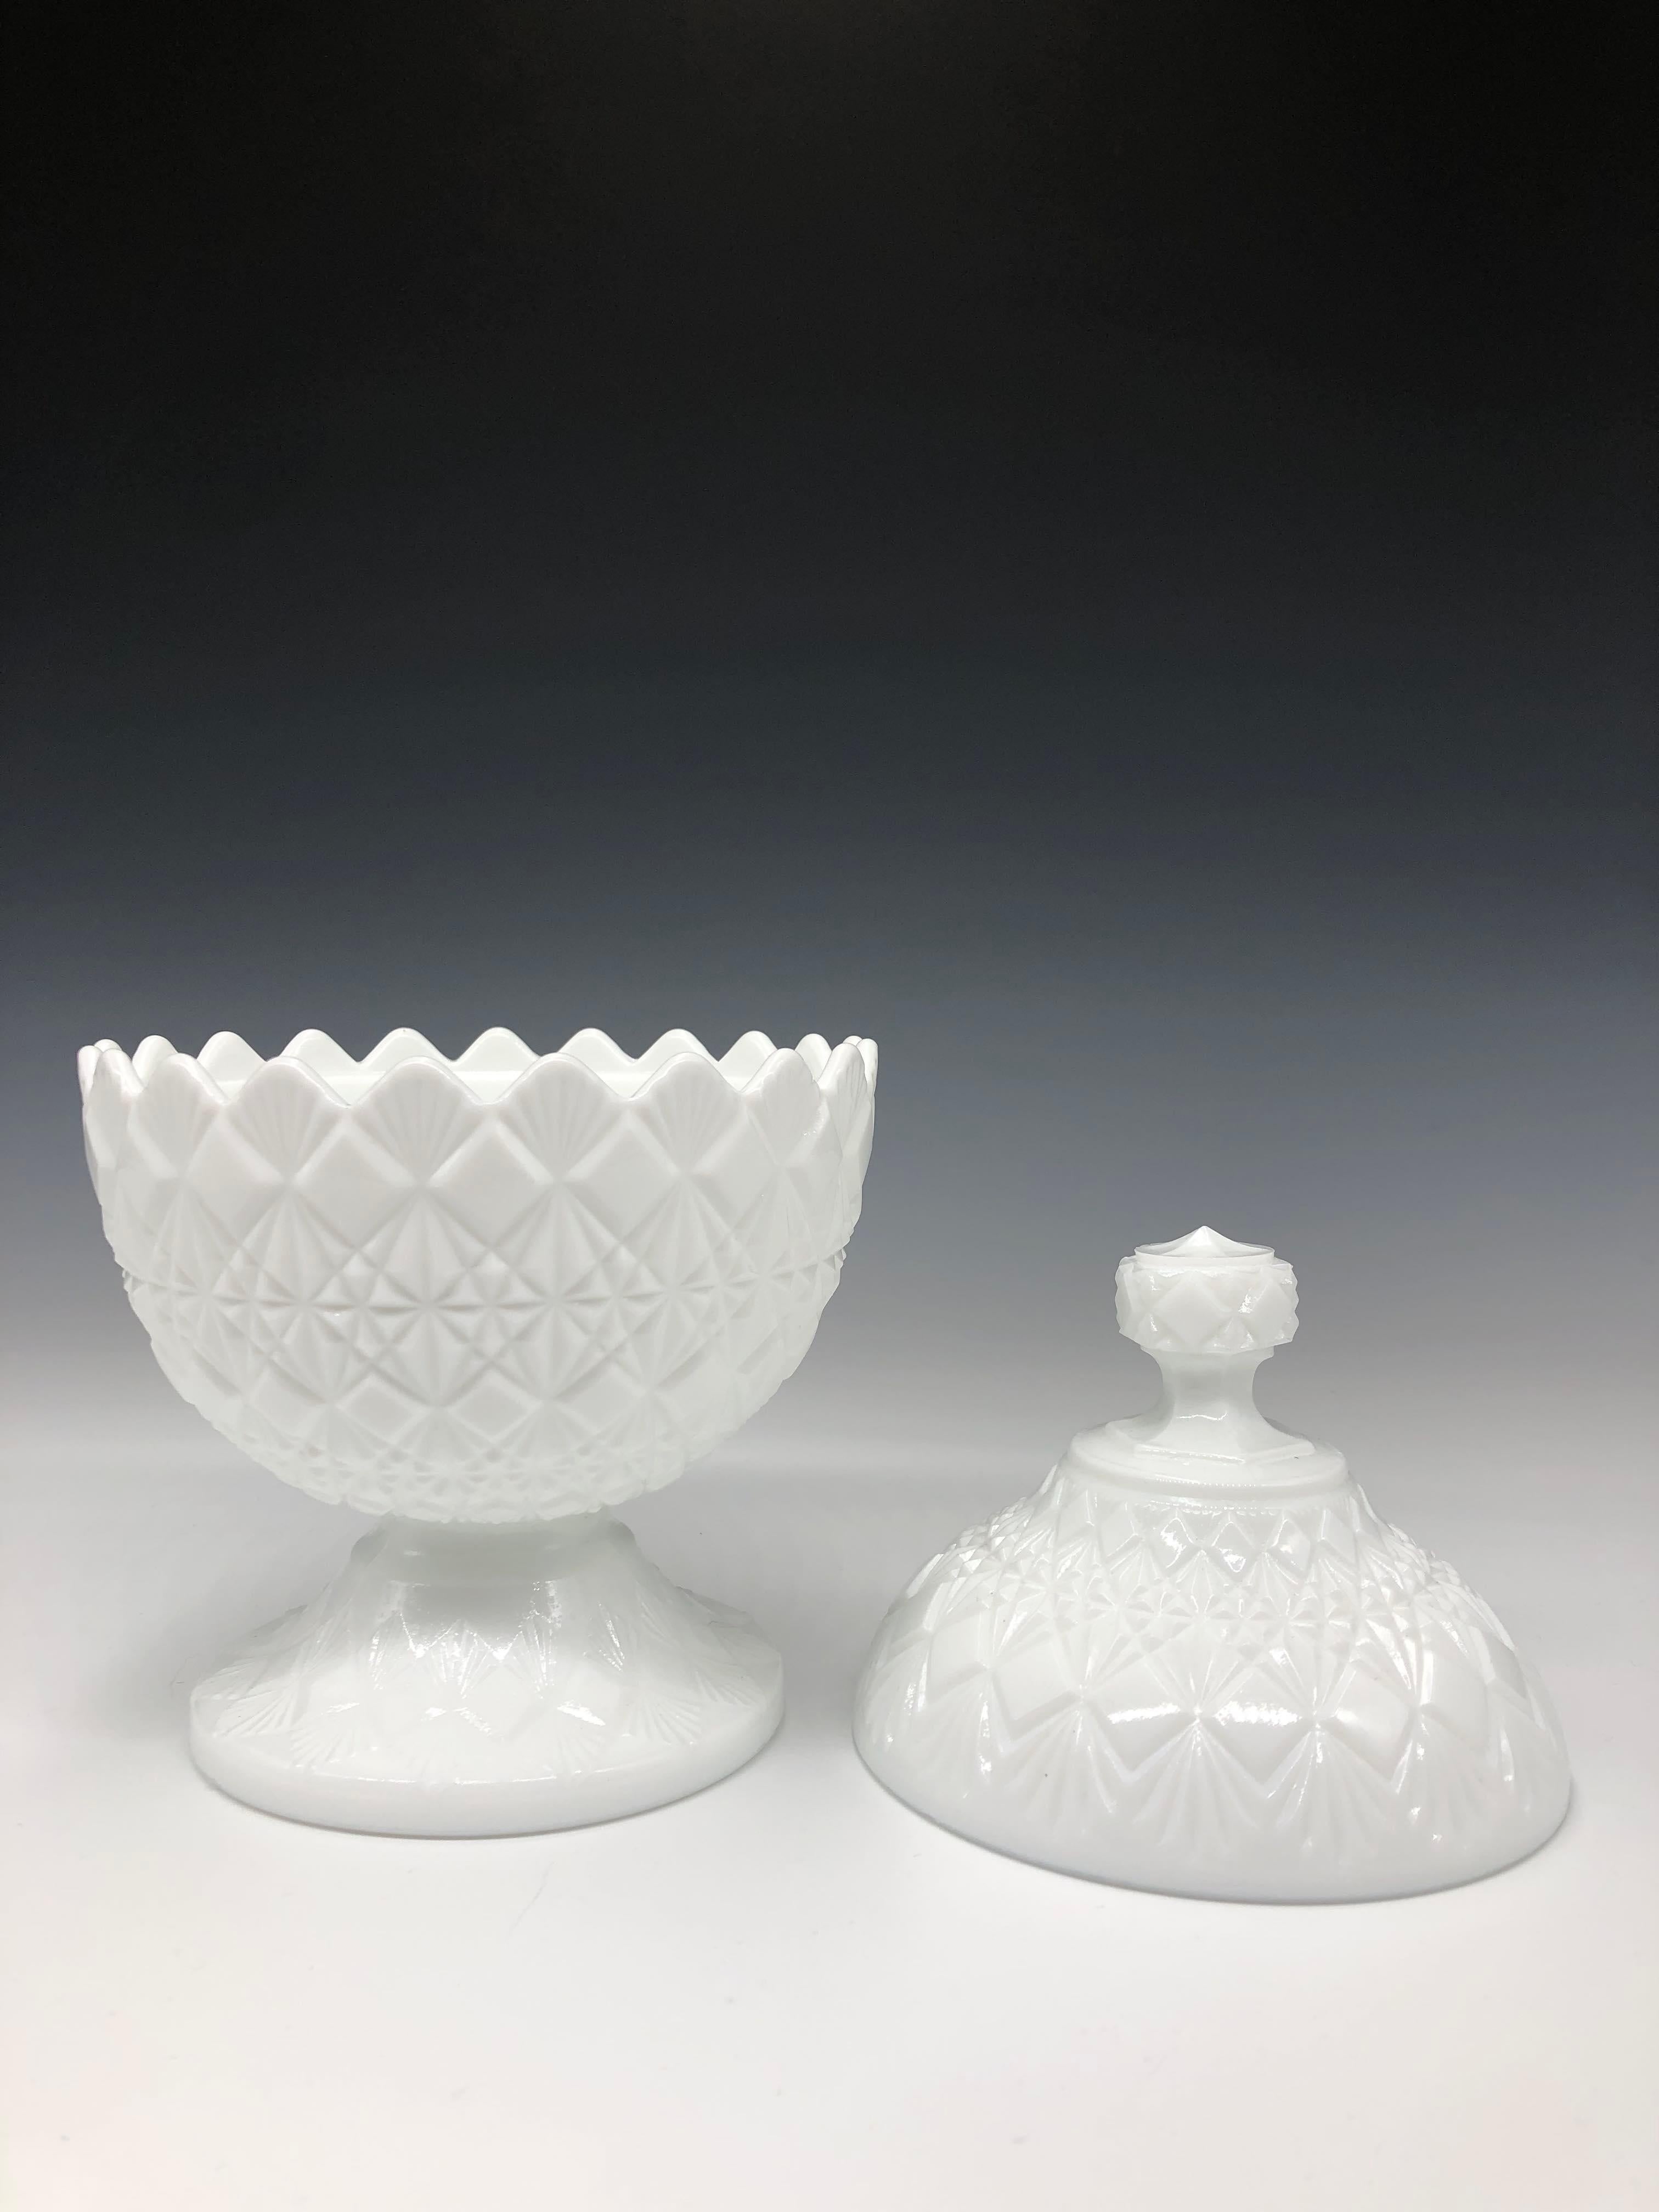 Modern 1960s White Fenton Olde Virginia Glass Pedestal Candy Dish with Lid For Sale